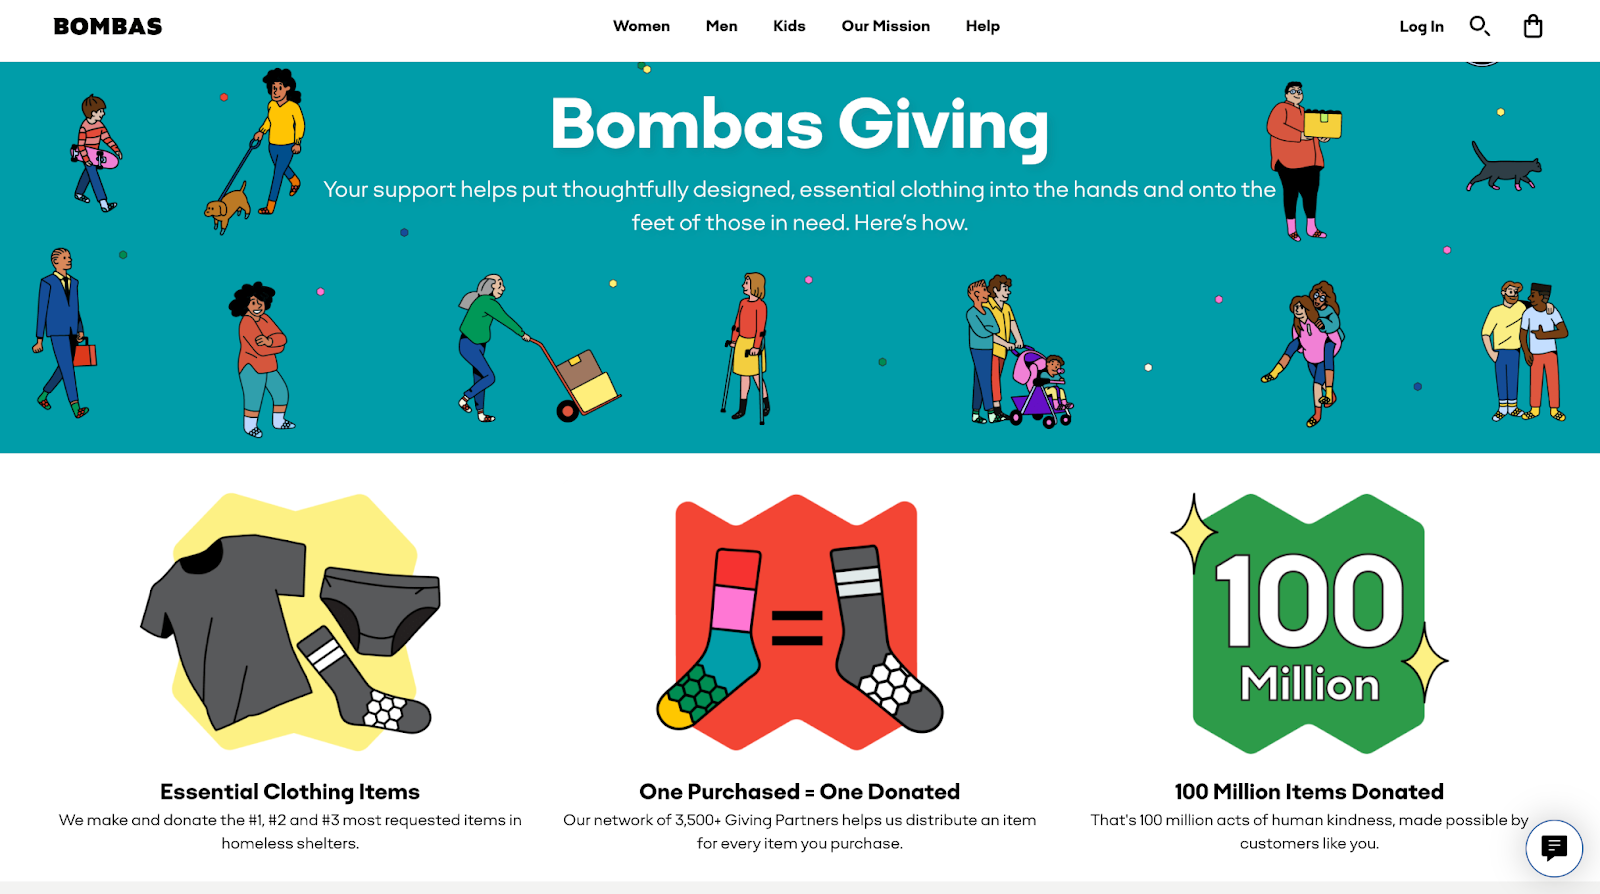 sock brand's giving back page showing how purchases support the community